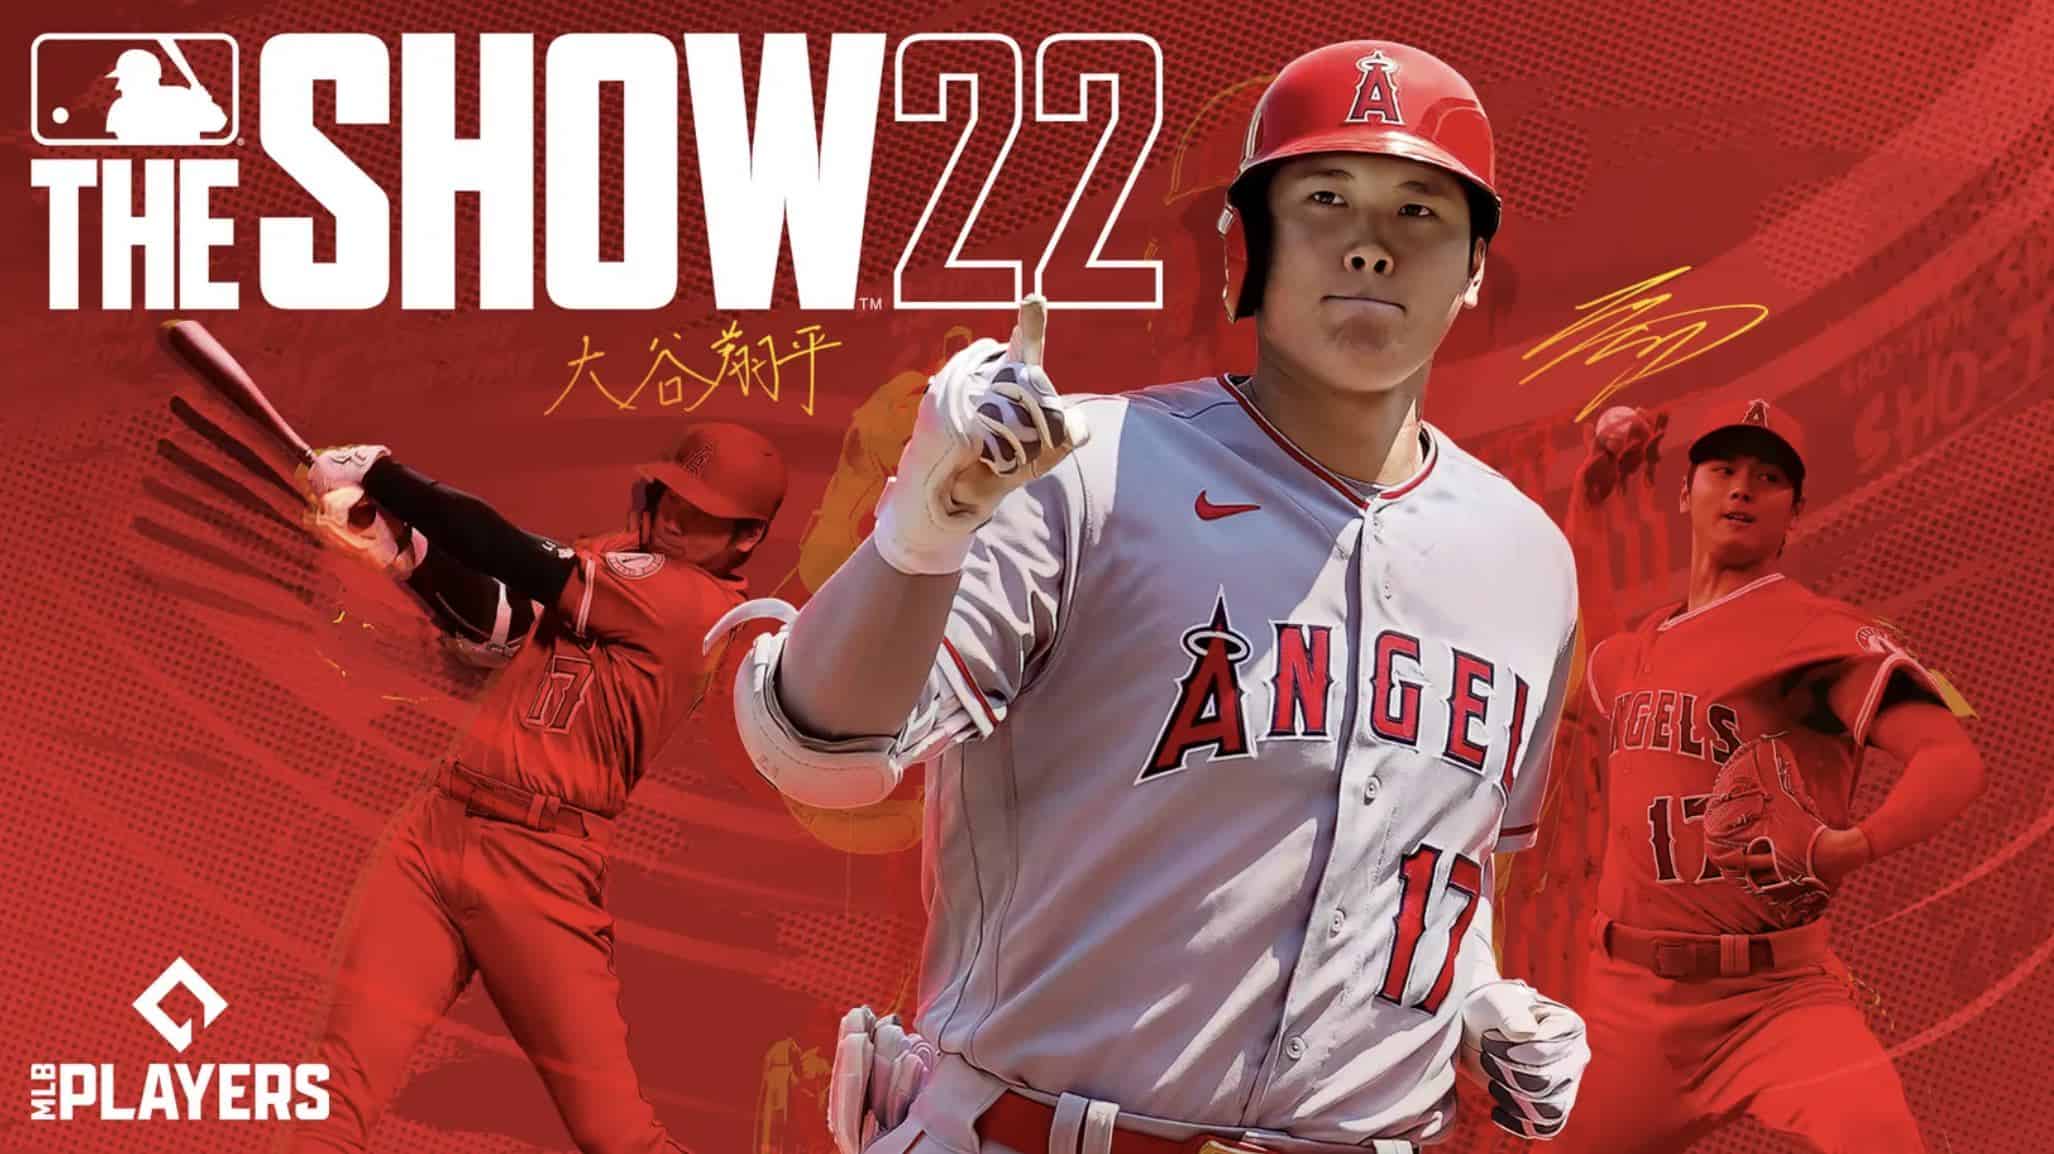 MLB The Show 22 game poster